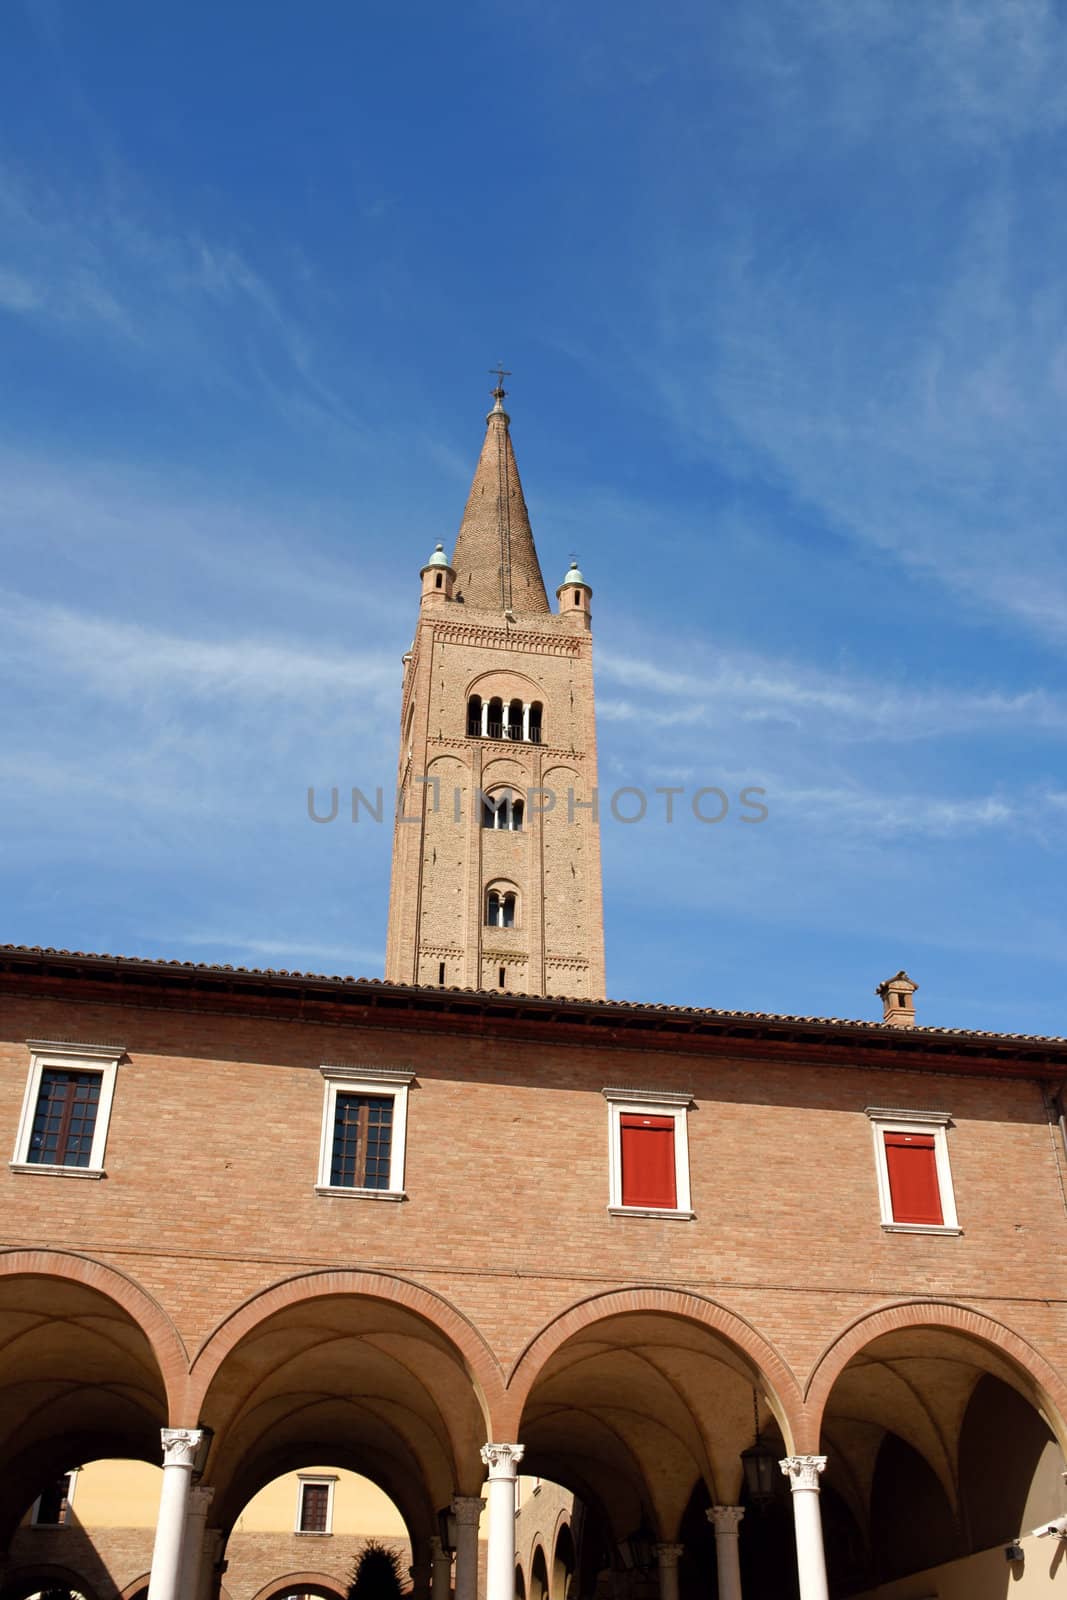 A first church was built in Forum Livii (Forlì) in the 4th century AD dedicated to St. Stephen. It was destroyed by a fire in 1173. The dedication to Saint Mercurialis the local martyr and patron had appeared since the 9th century. In 1176 the edifice was assigned to the Vallumbrosan Order. The current edifice was finished in 1180 in Lombard-Romanesque style along with the famous bell tower.